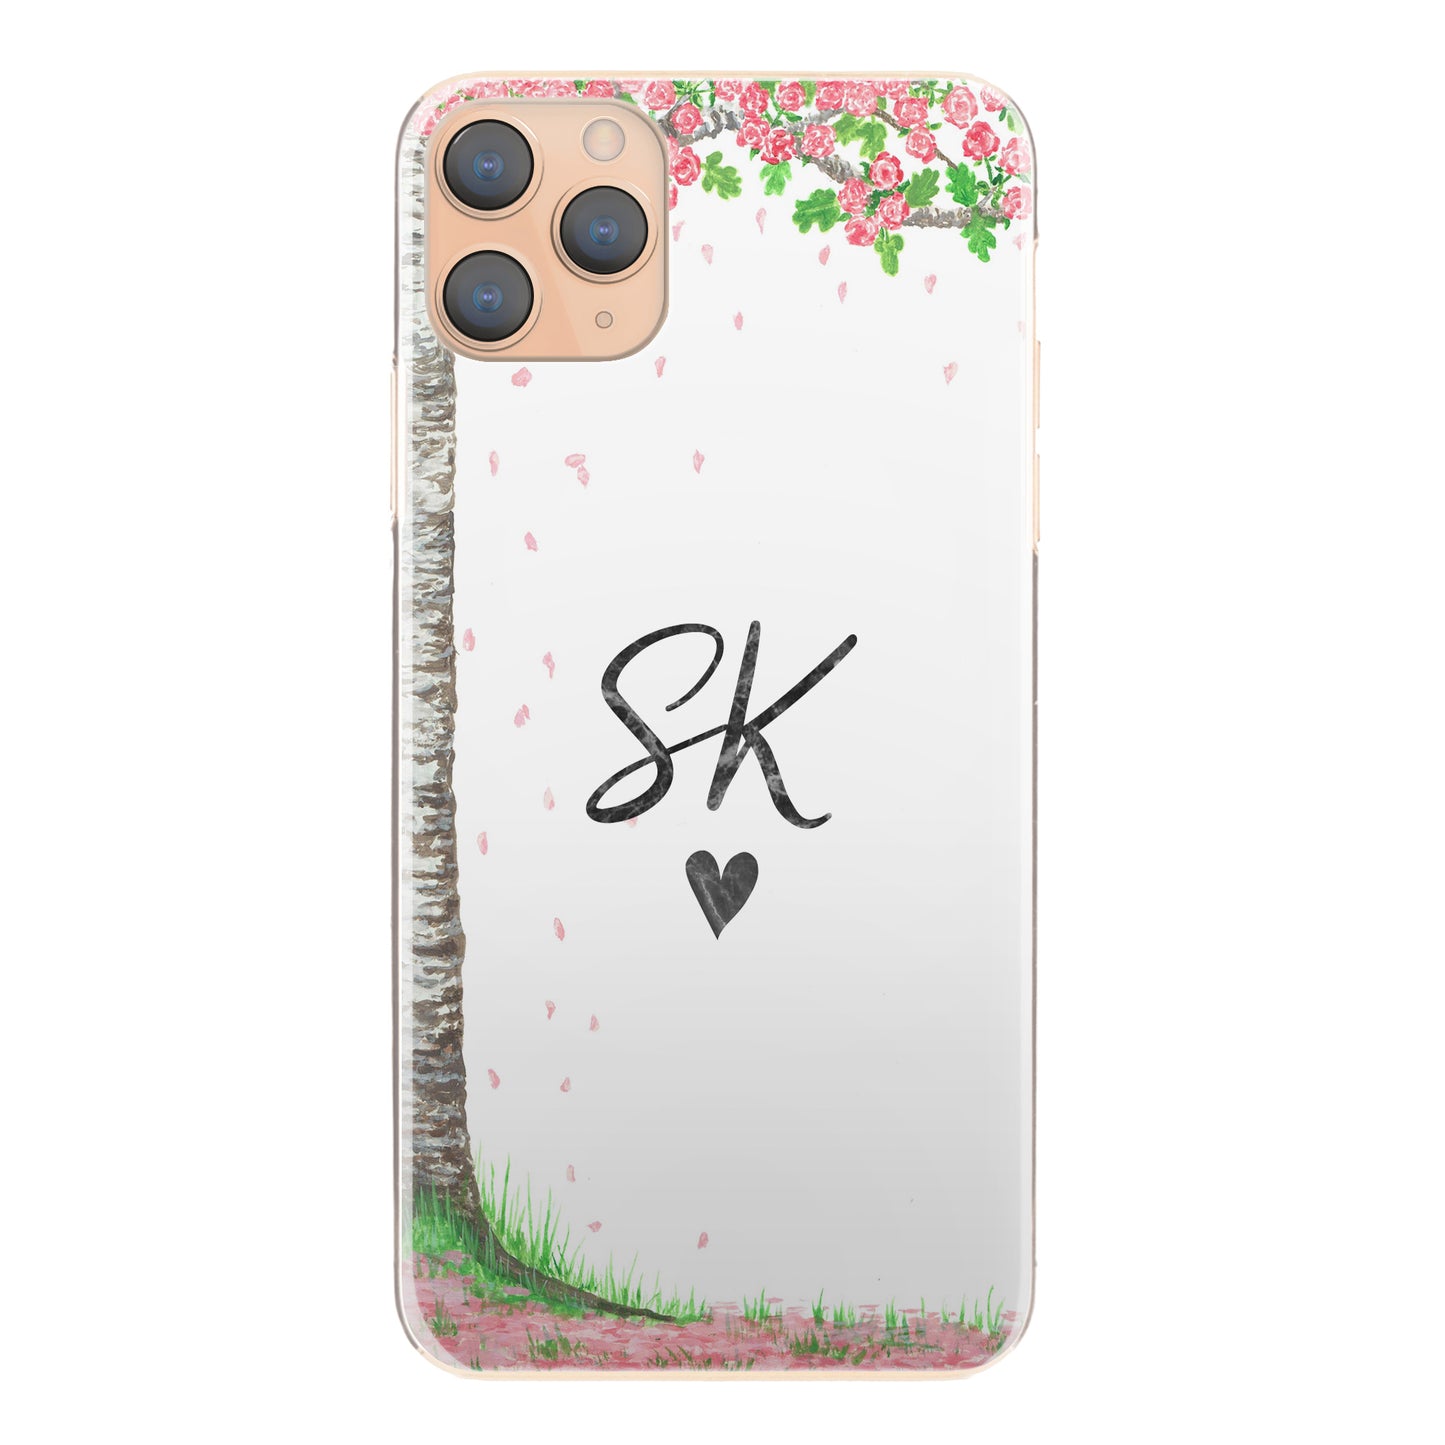 Personalised LG Phone Hard Case with Pink Flower Tree and Heart Accented Initials